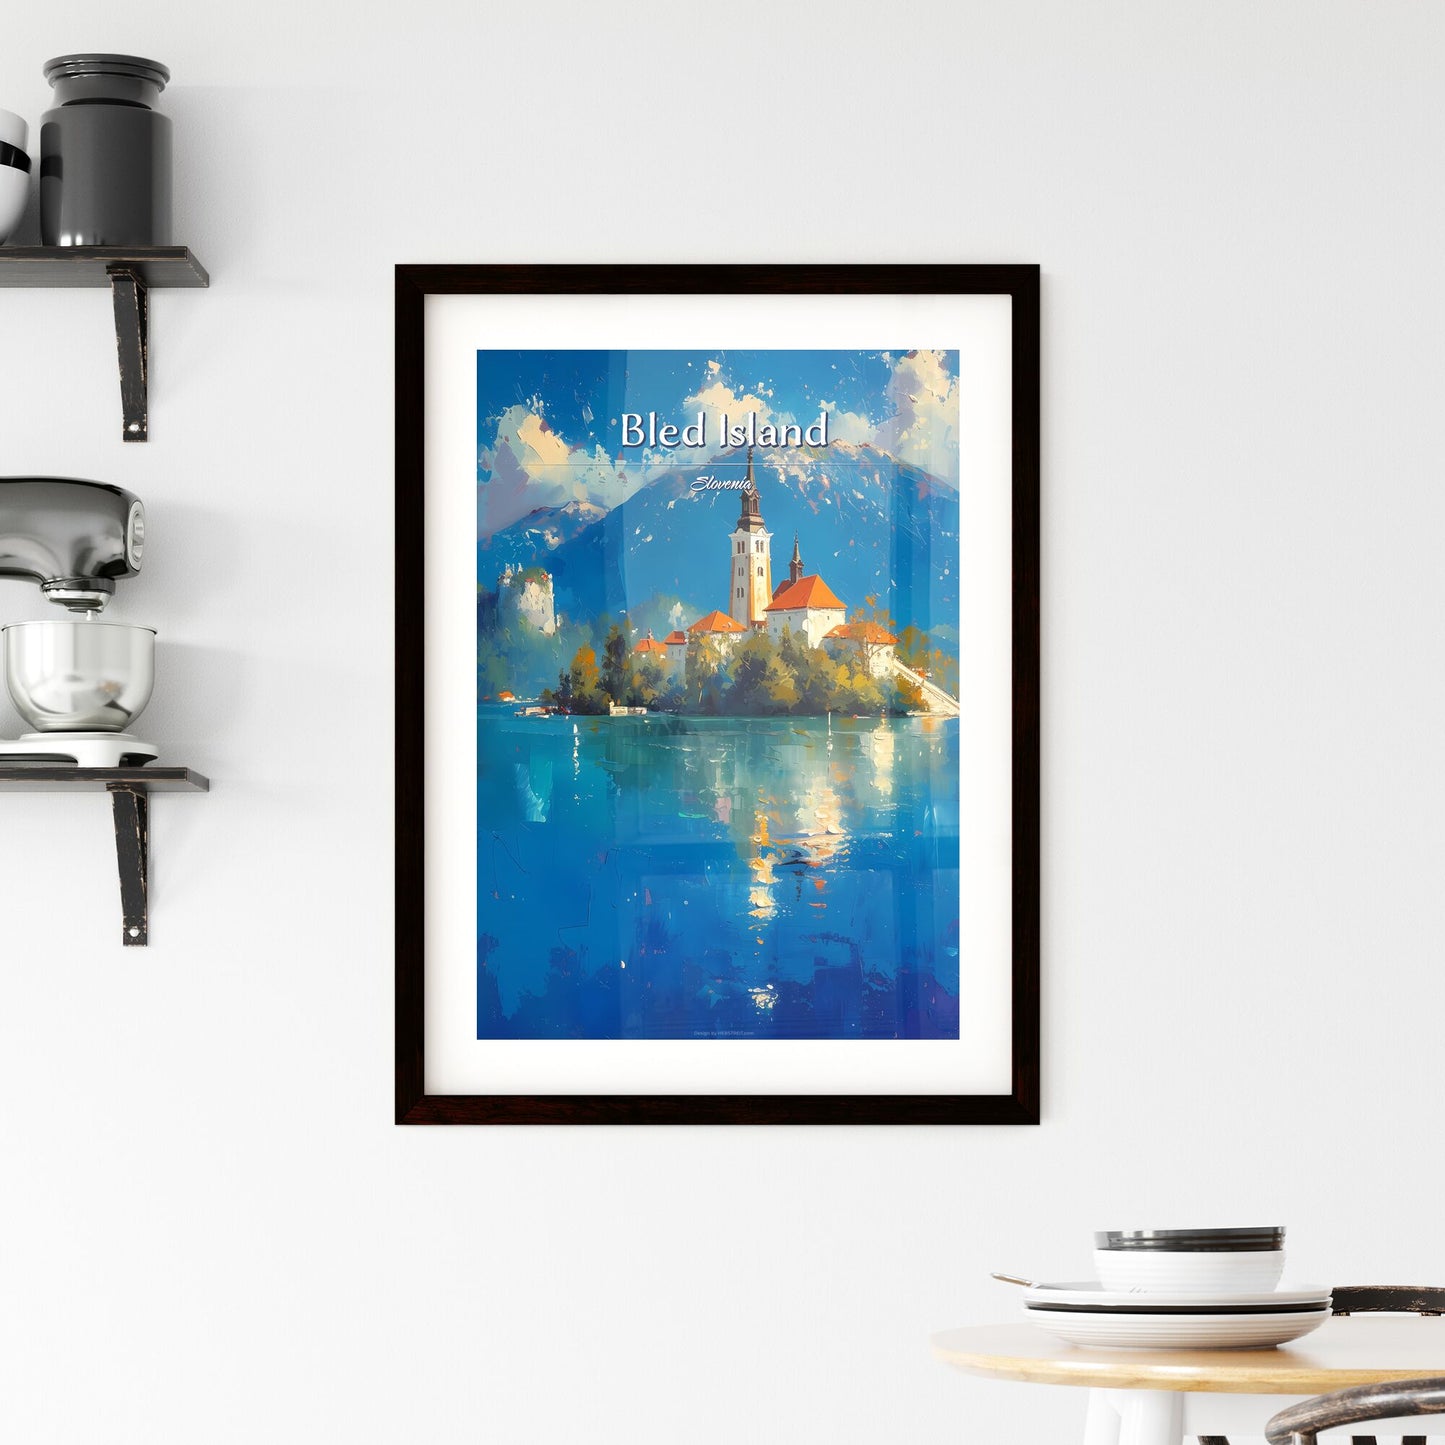 Bled Island, Slovenia - Art print of a building on an island in the water Default Title